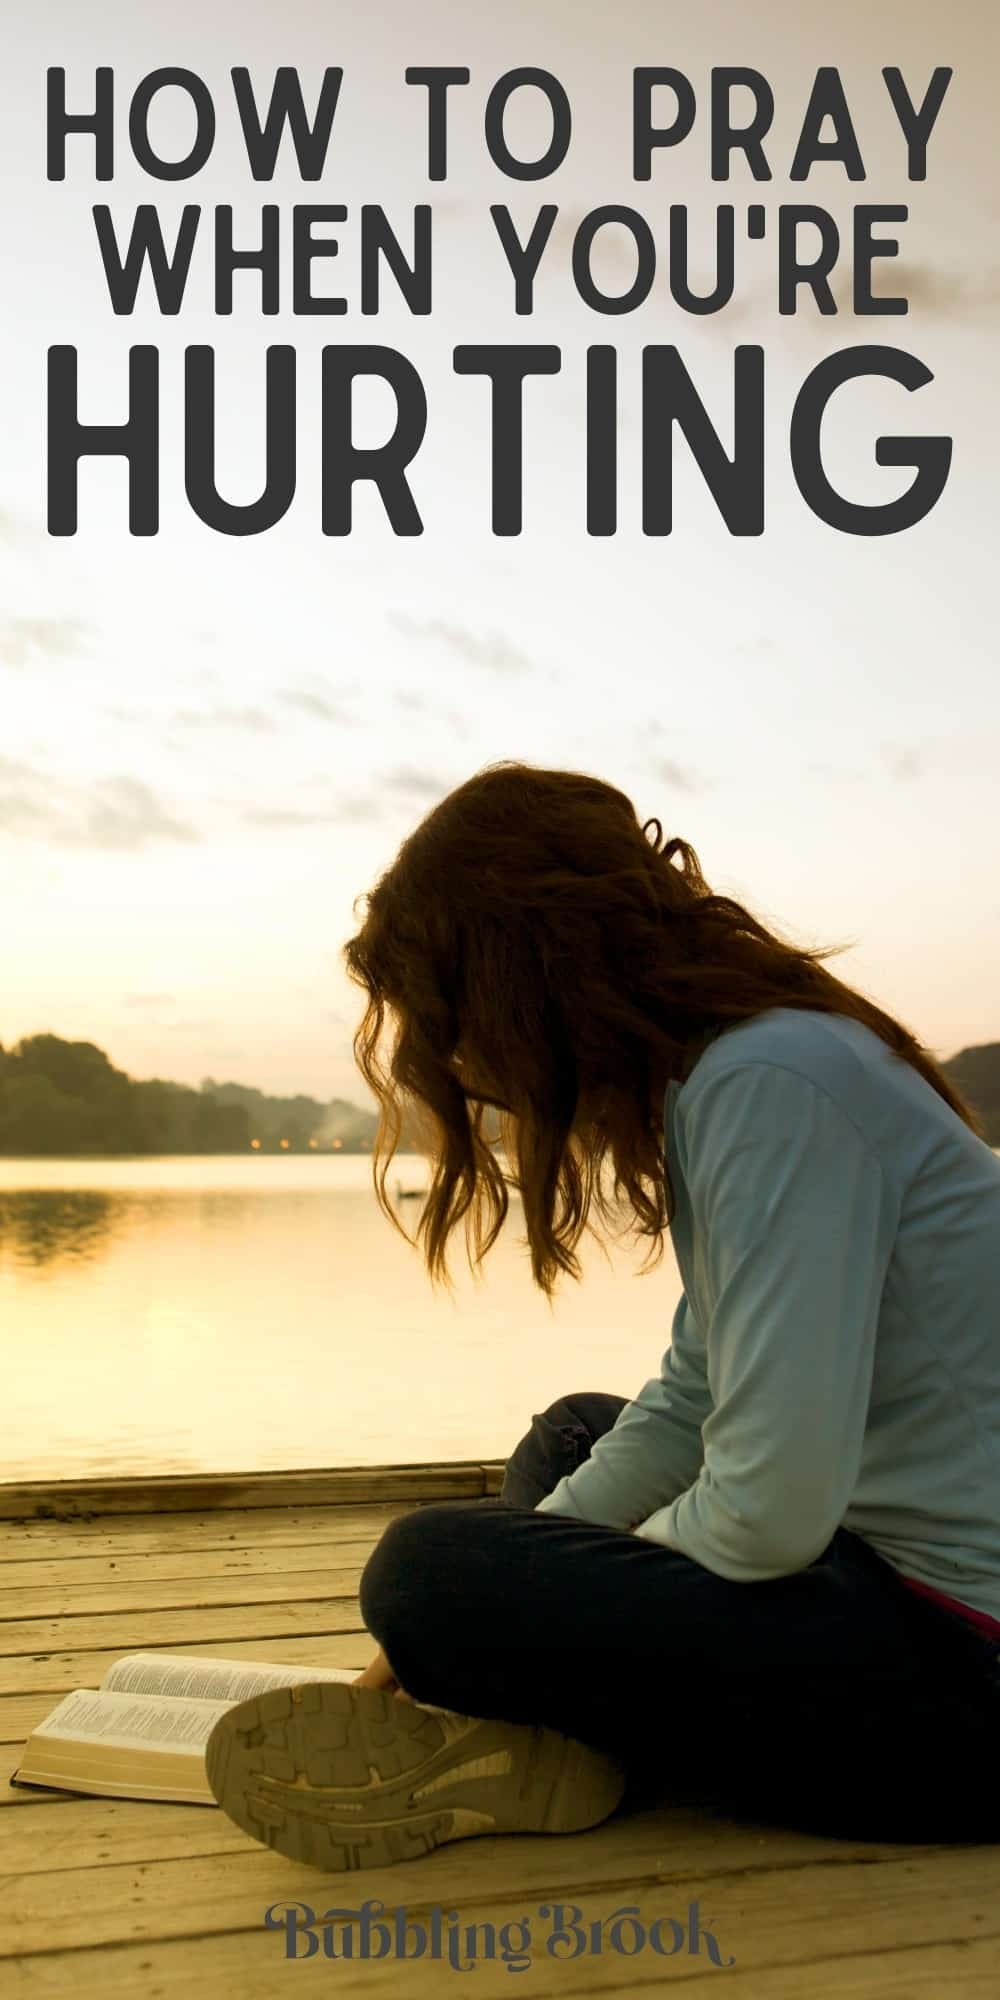 God please help me through this: how to pray when you're hurting - pin for pinterest